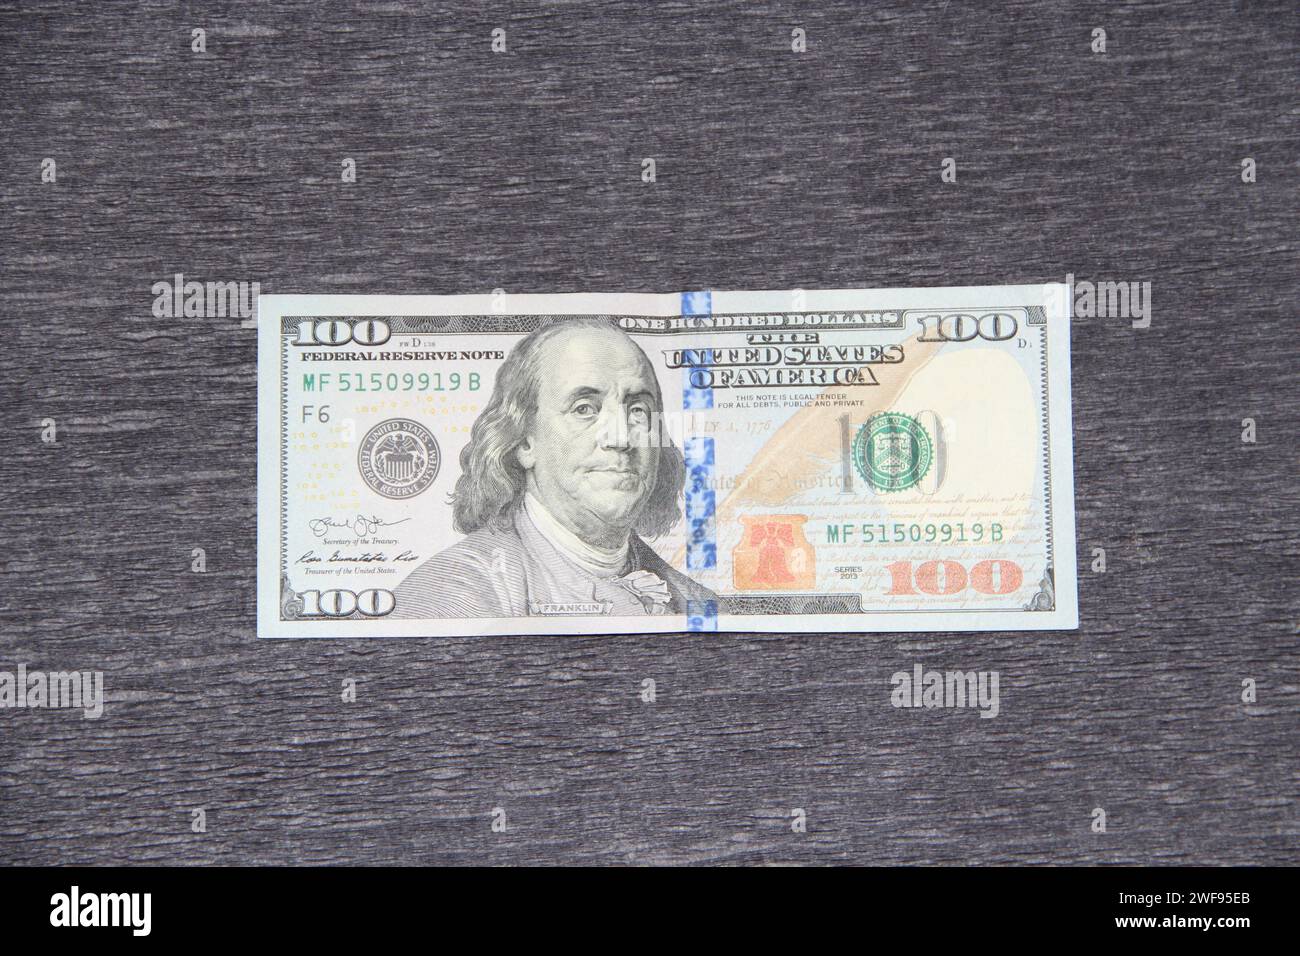 Front side of hundred dollar bill. One hundred dollars on gray background. National currency of USA. United States Money featuring Benjamin Franklin Stock Photo